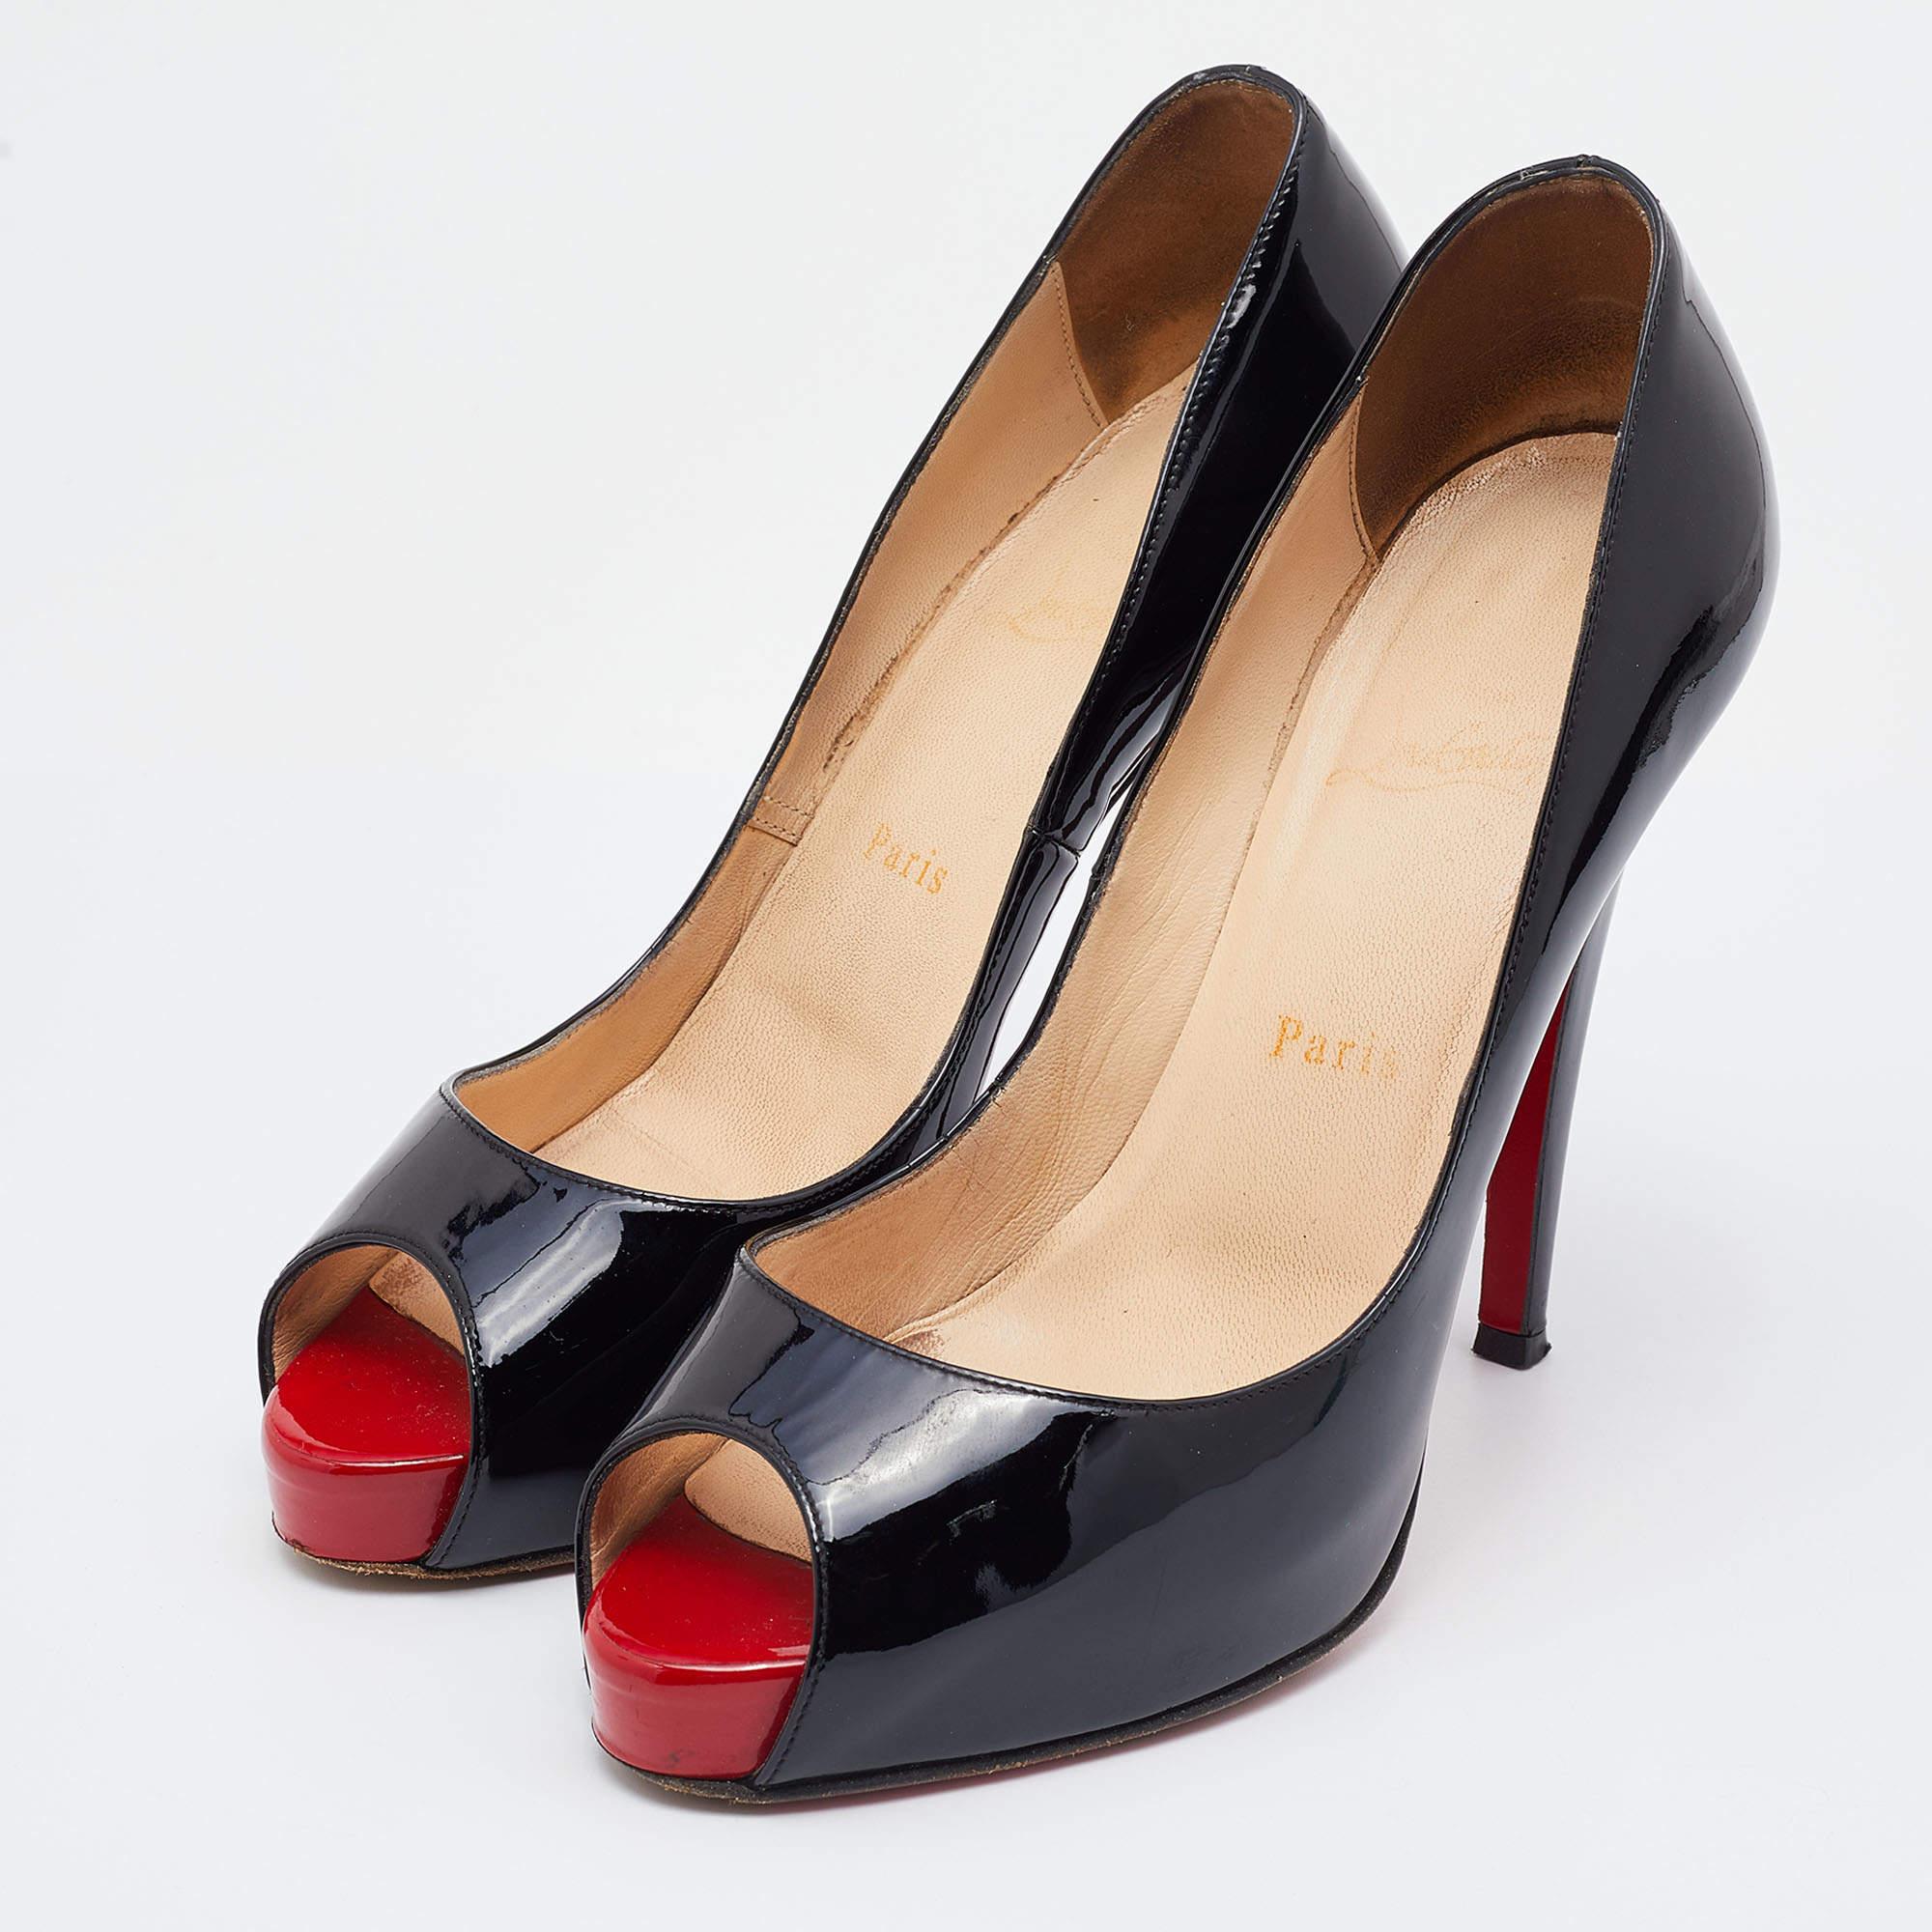 Women's Christian Louboutin Black Patent Leather New Very Prive Pumps Size 39